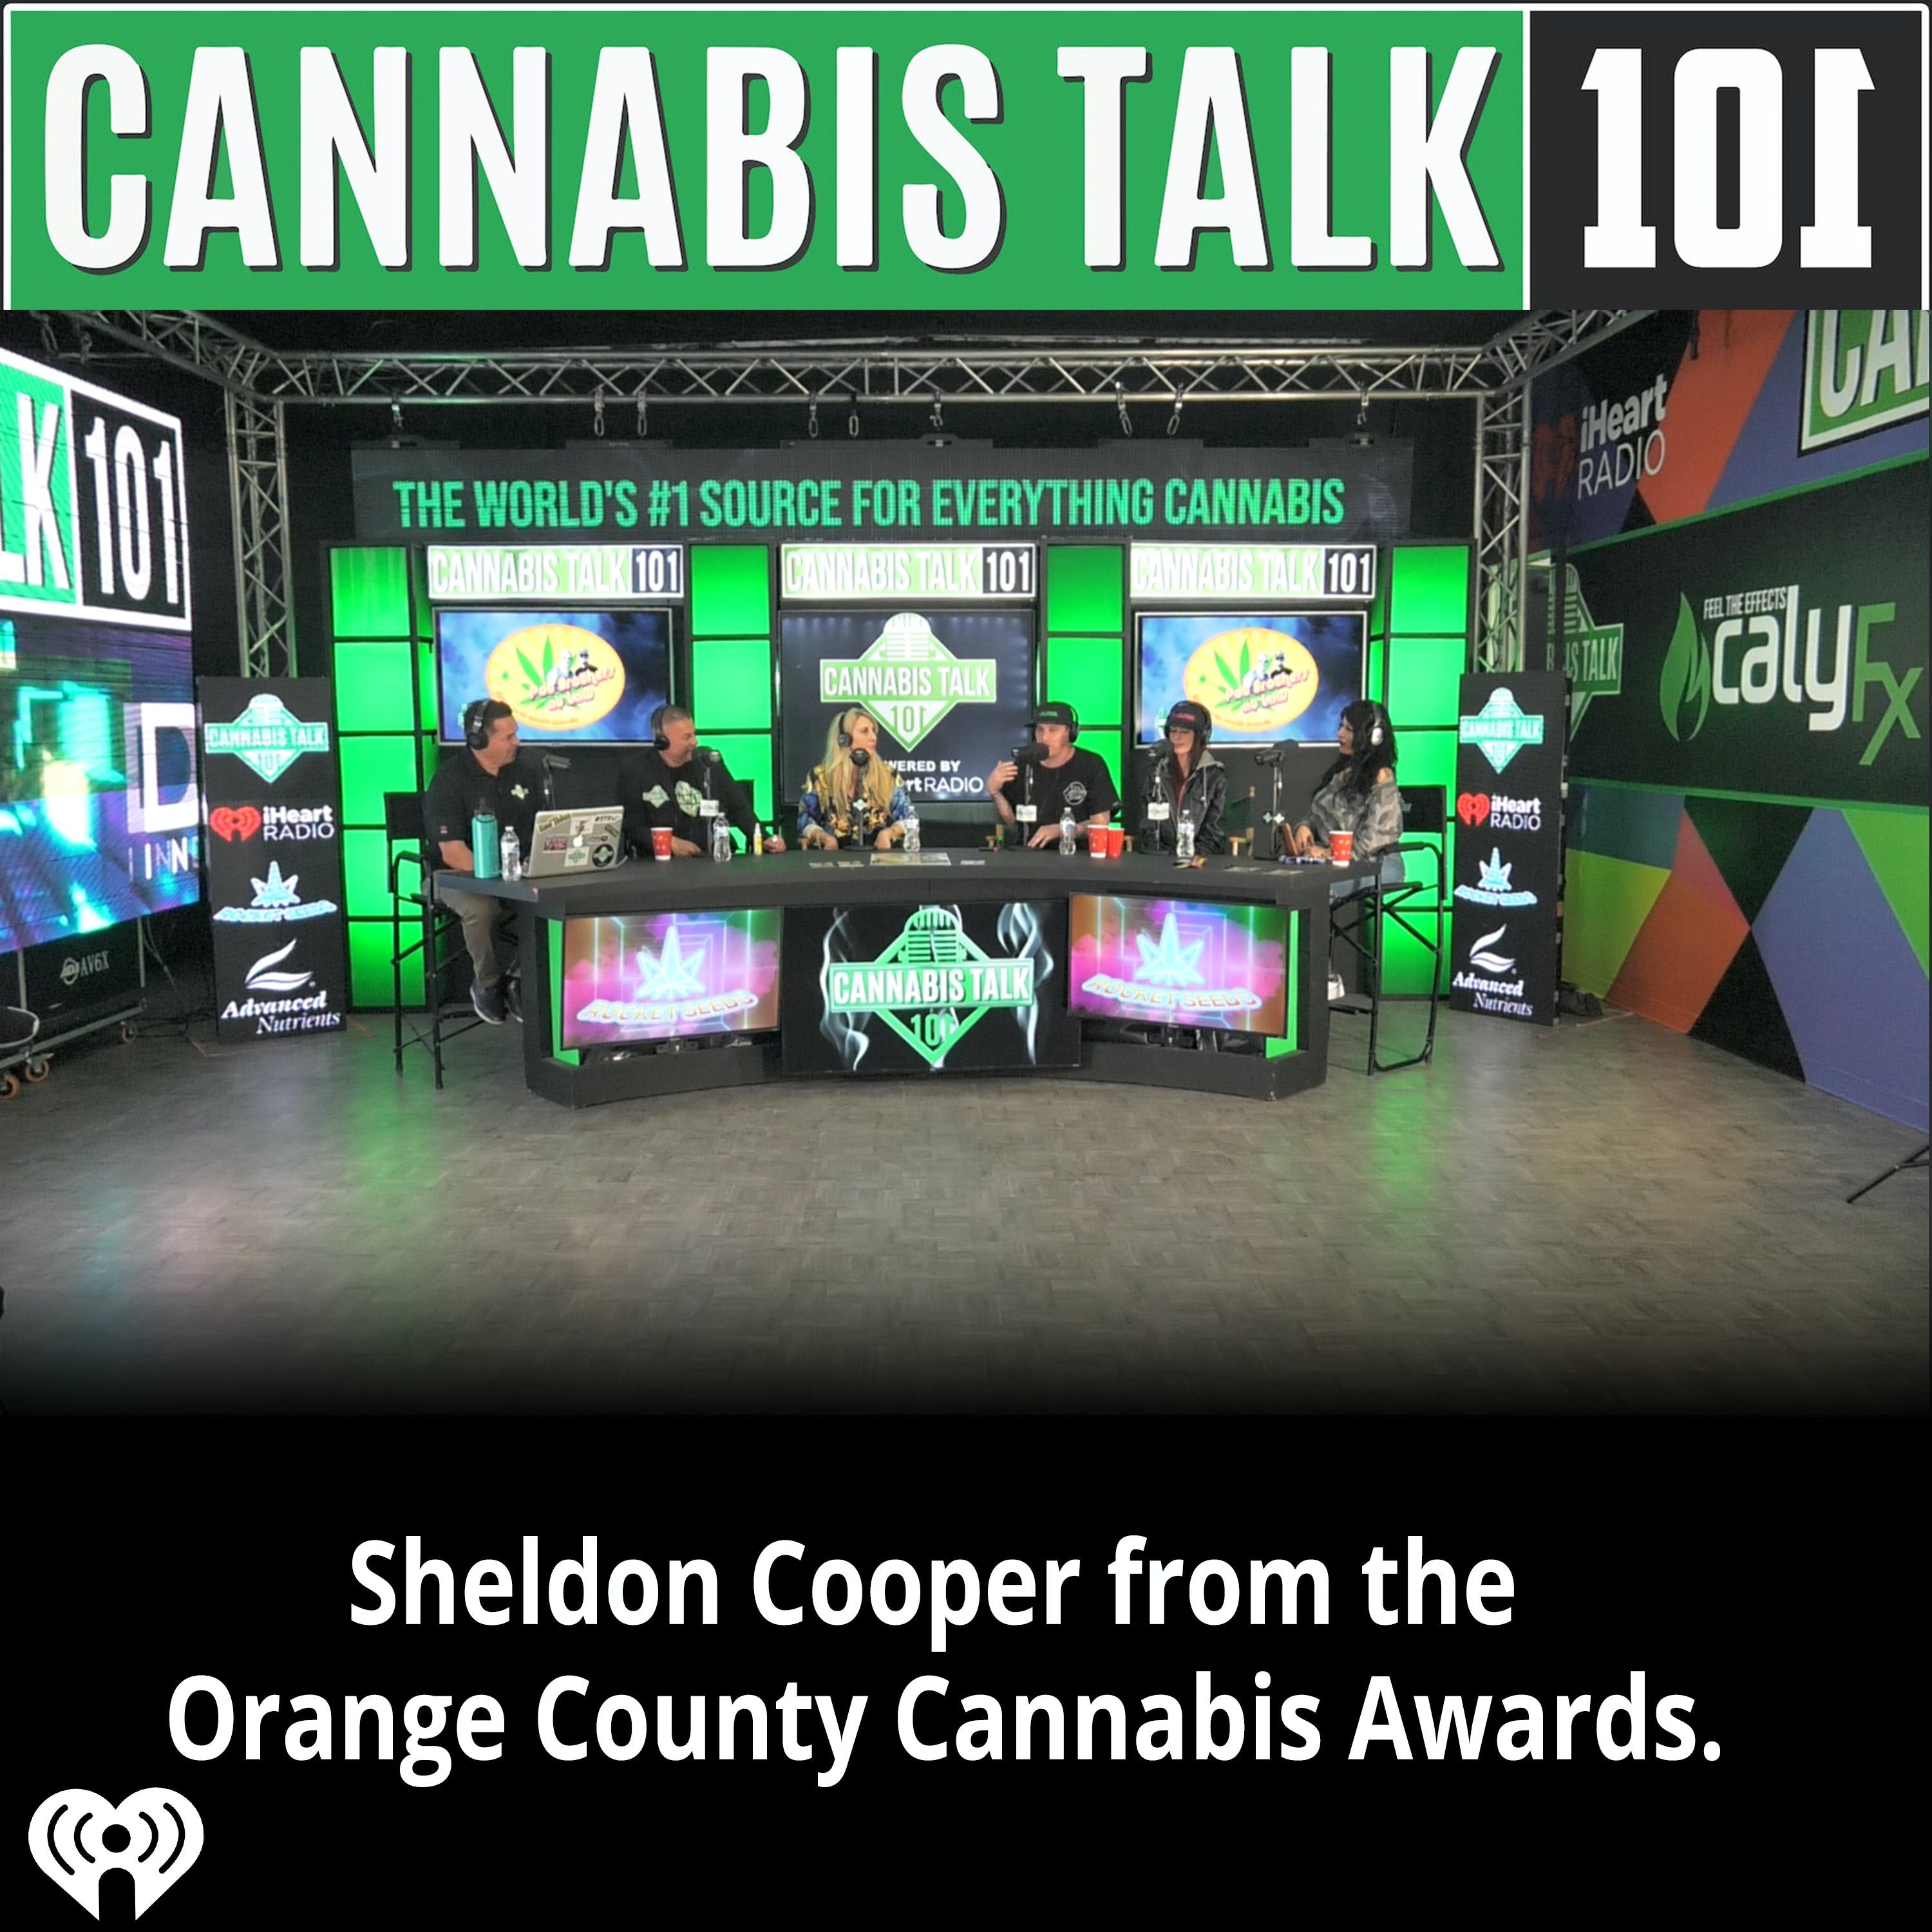 Sheldon Cooper from the Orange County Cannabis Awards.